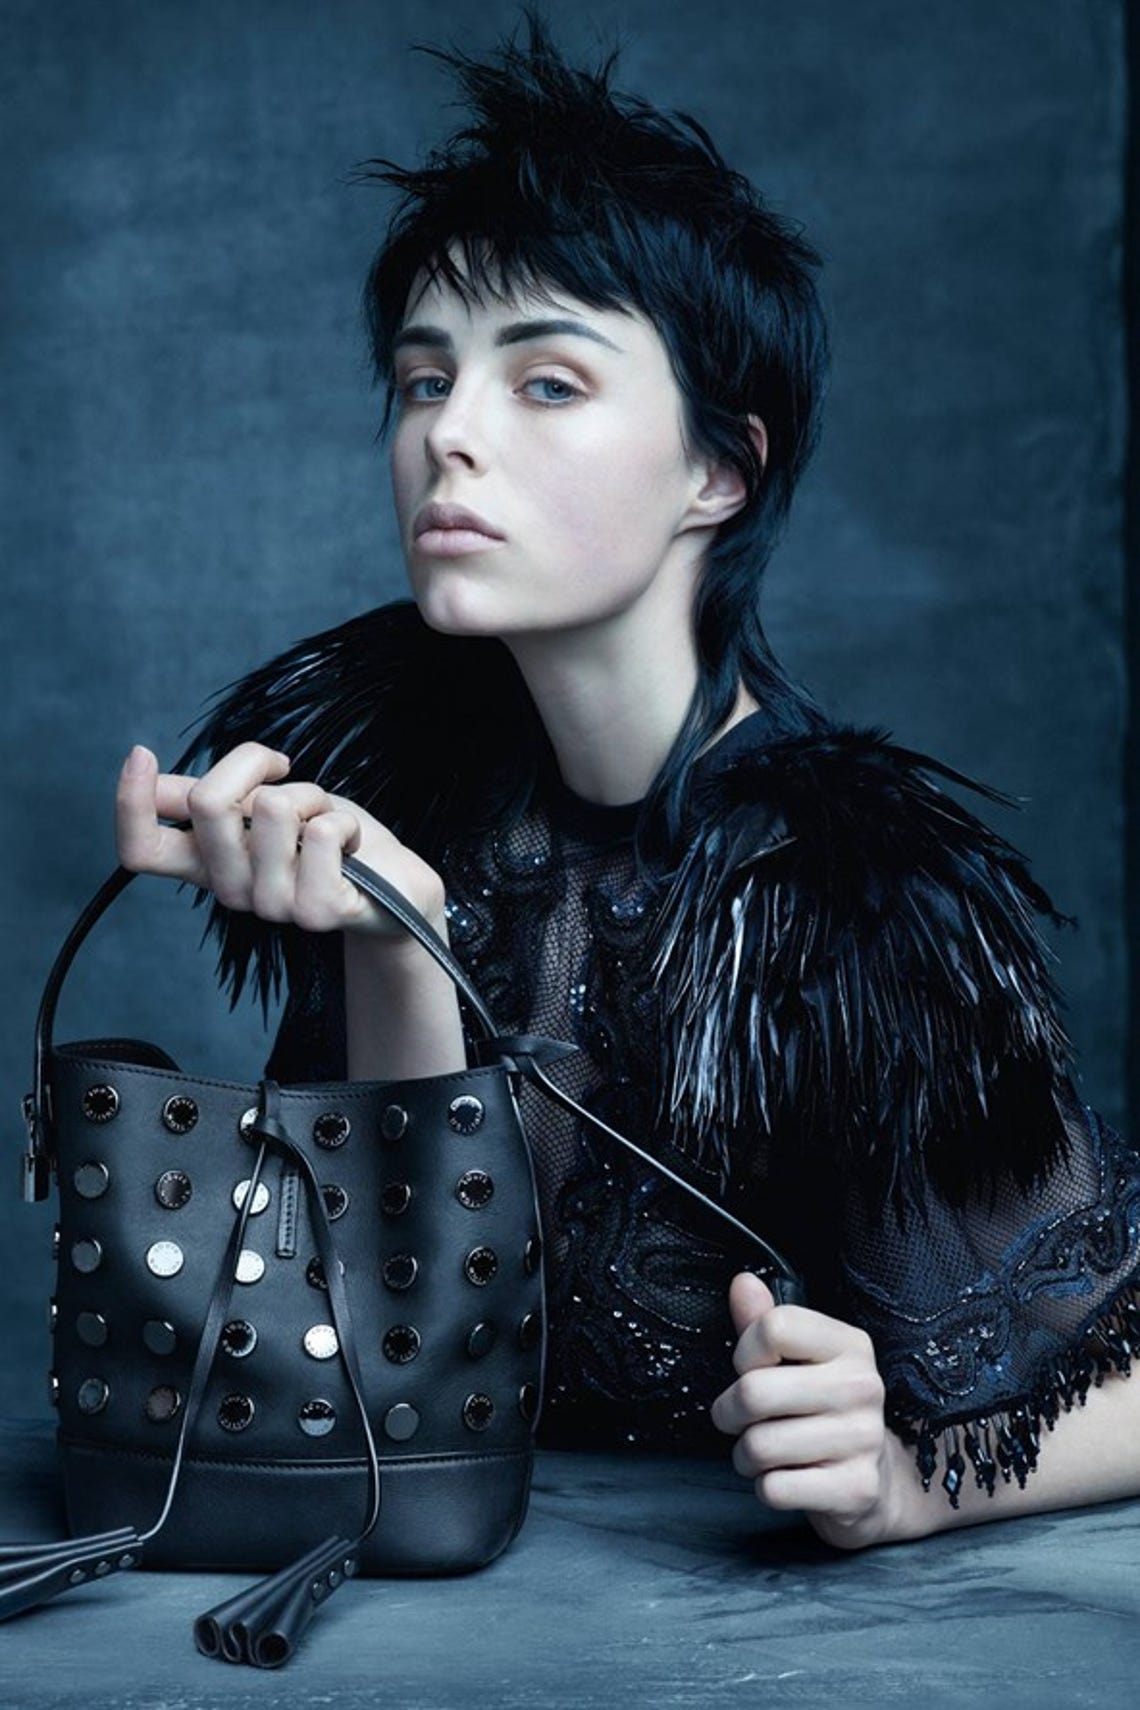 FAB 5 FRIDAY: MARC JACOBS FOR LV